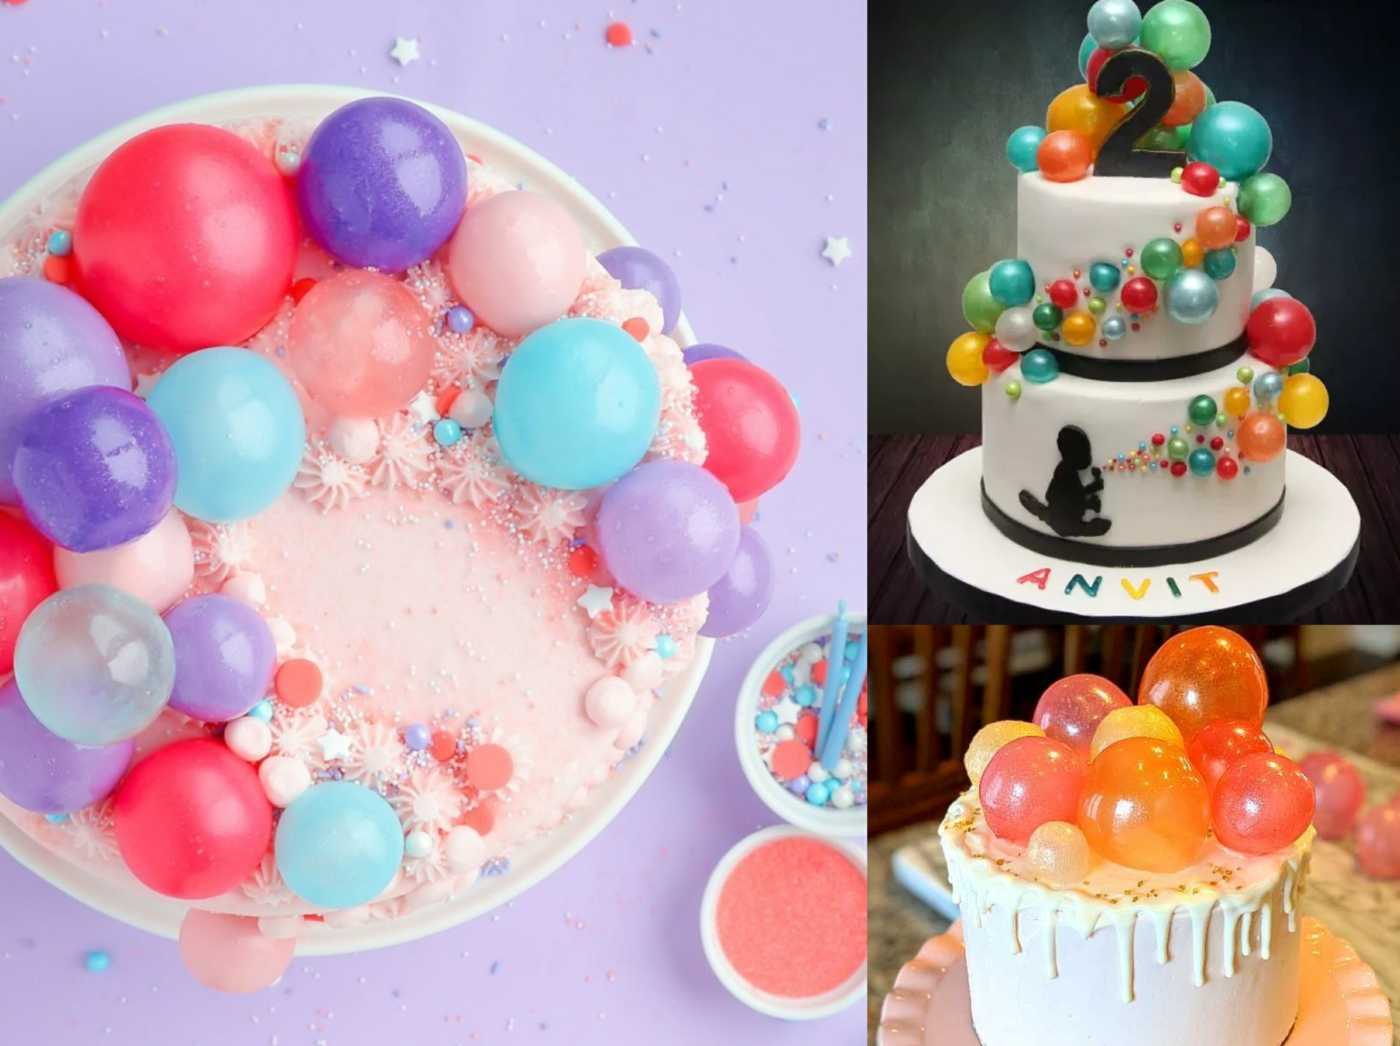 Make gelatine balls themselves as a cake for cakes and cupcakes